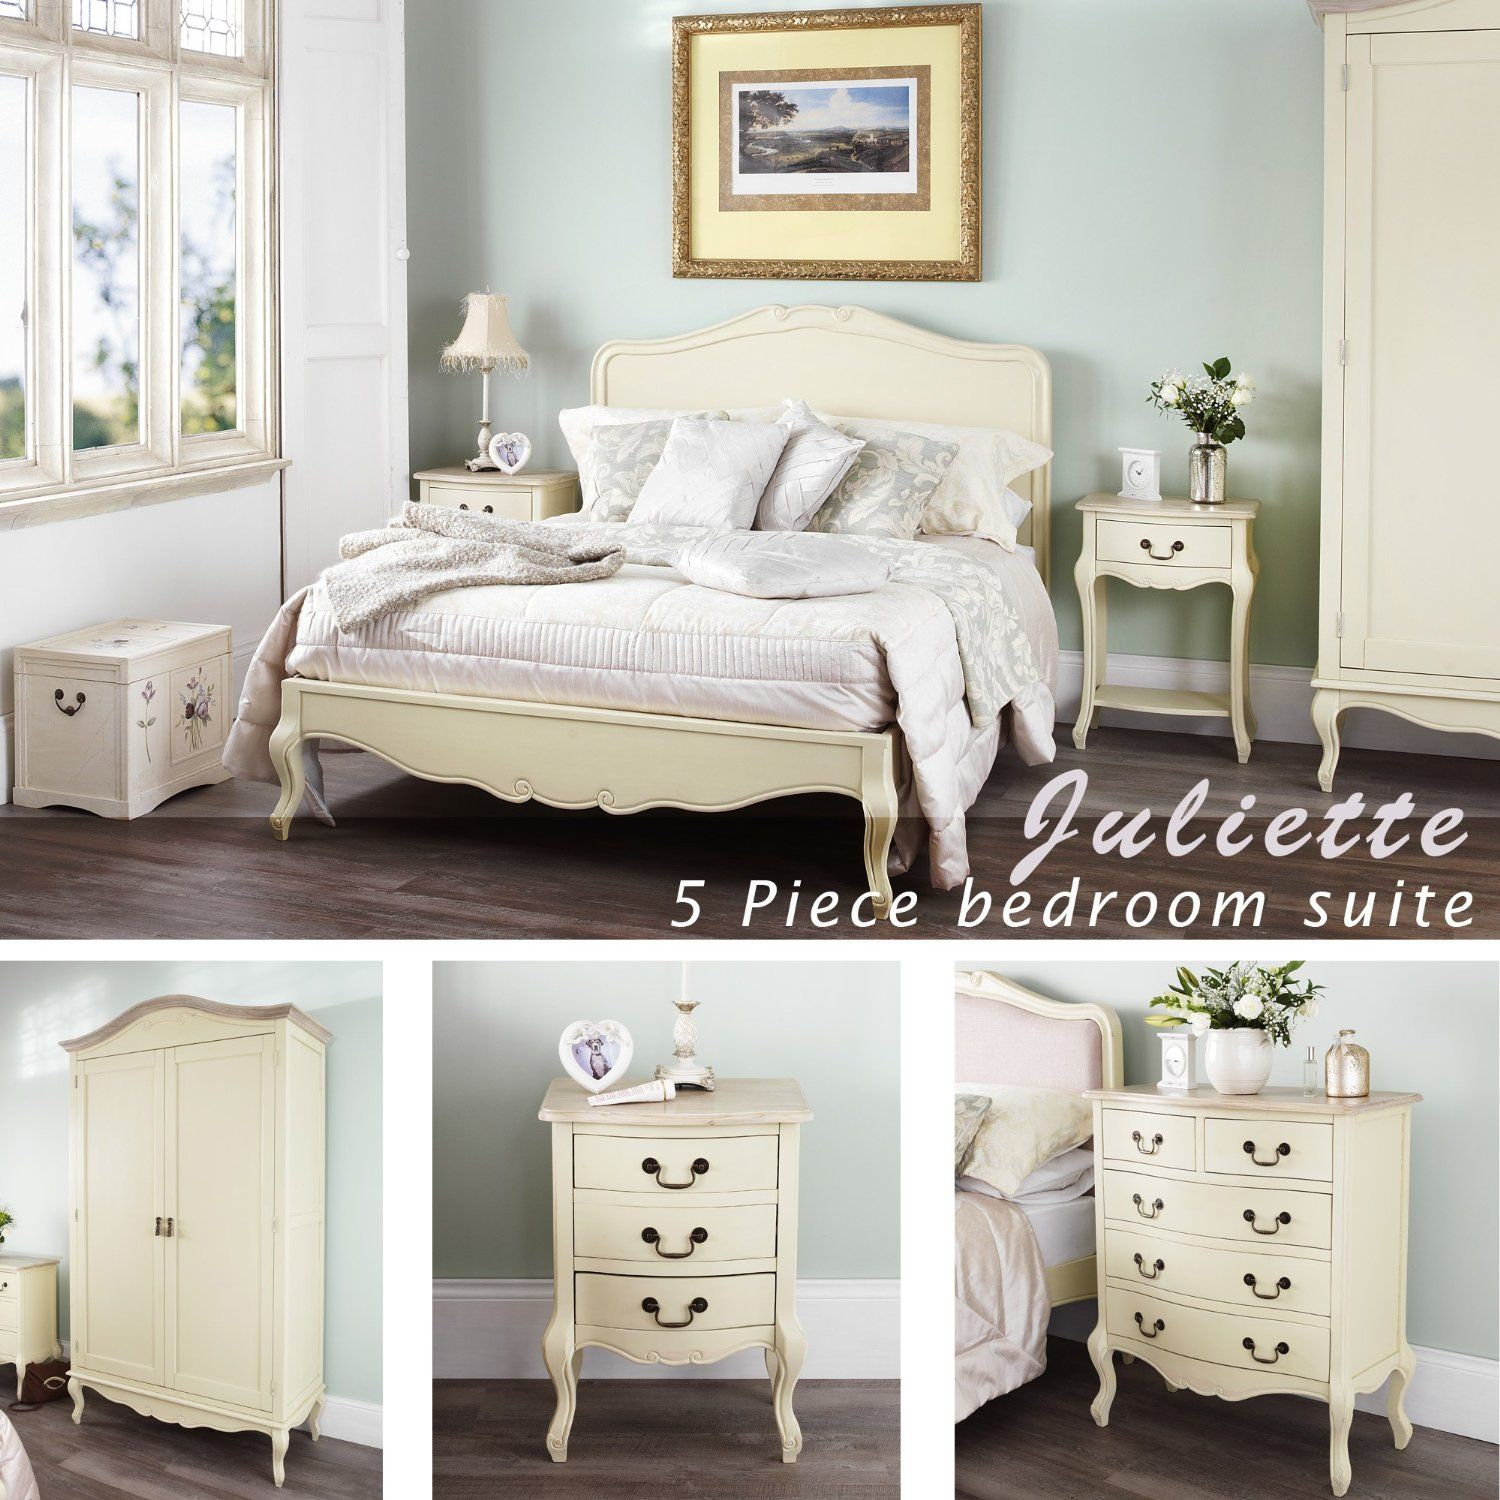 Gorgeous Juliette Shab Chic Champagne 5pc Bedroom Furniture Set throughout proportions 1500 X 1500